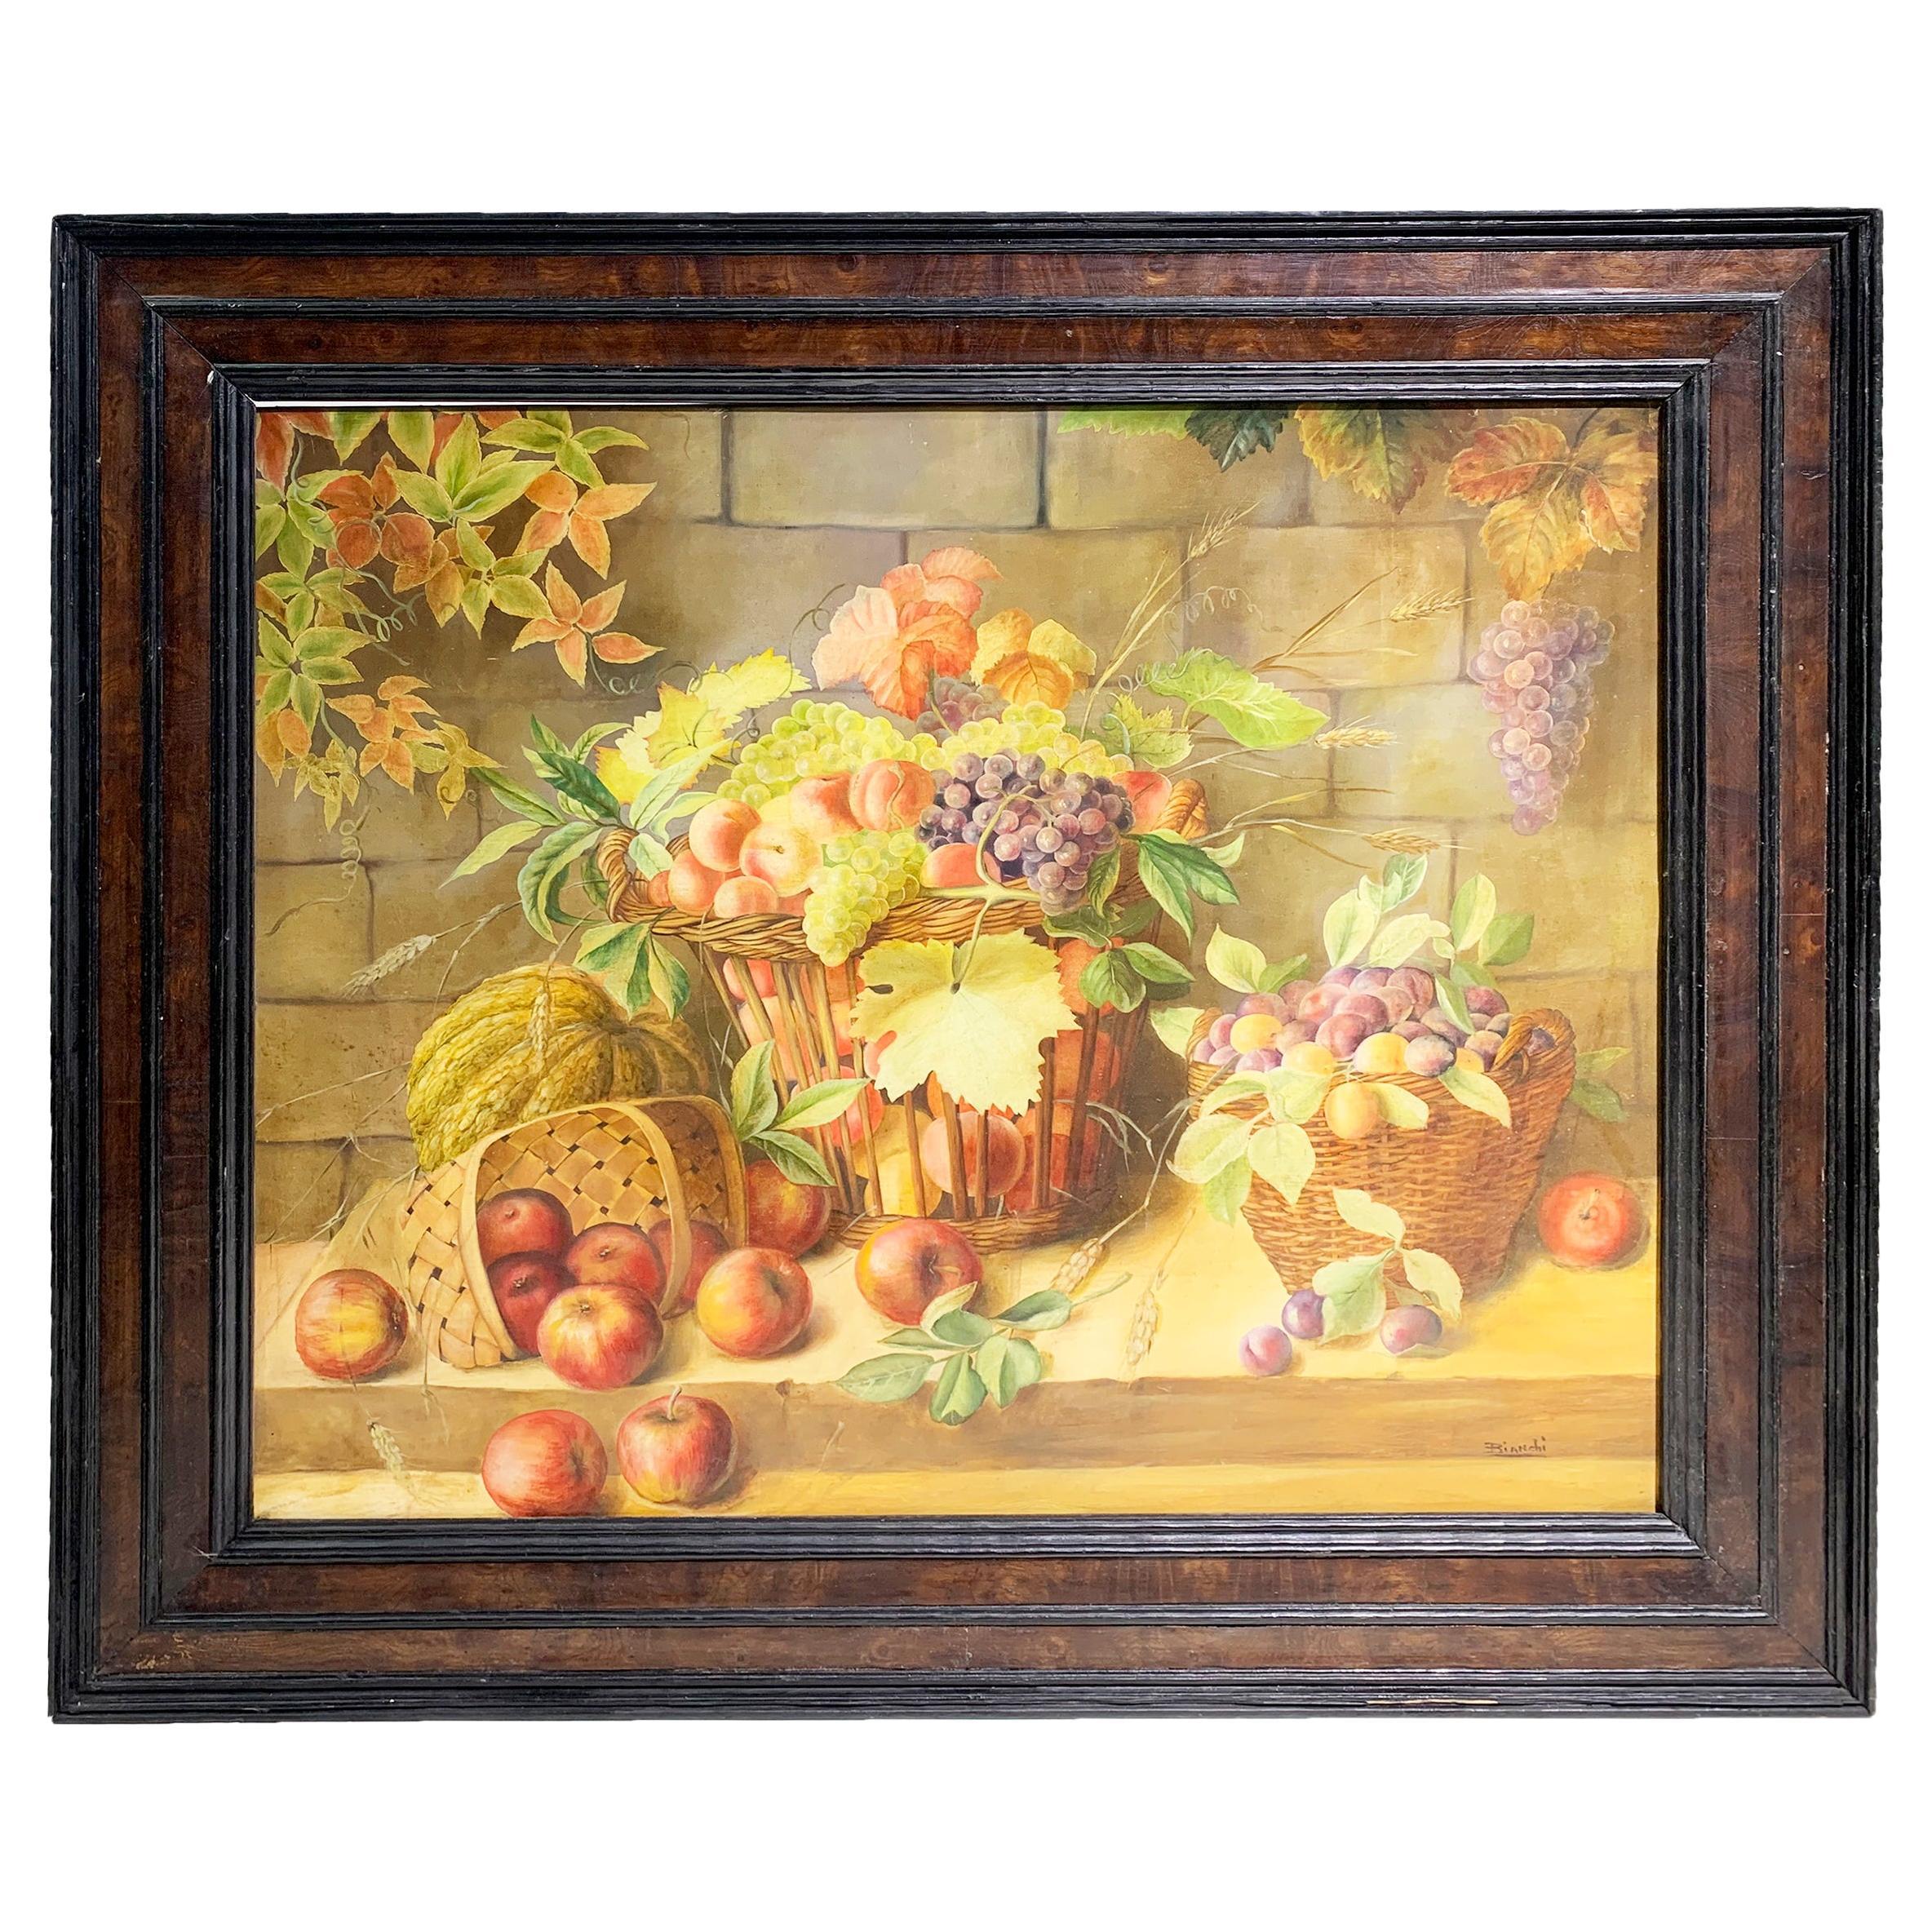 19th Century Still Life Wooden Framed Painting / Oil on Canvas, Signed Bianchi For Sale